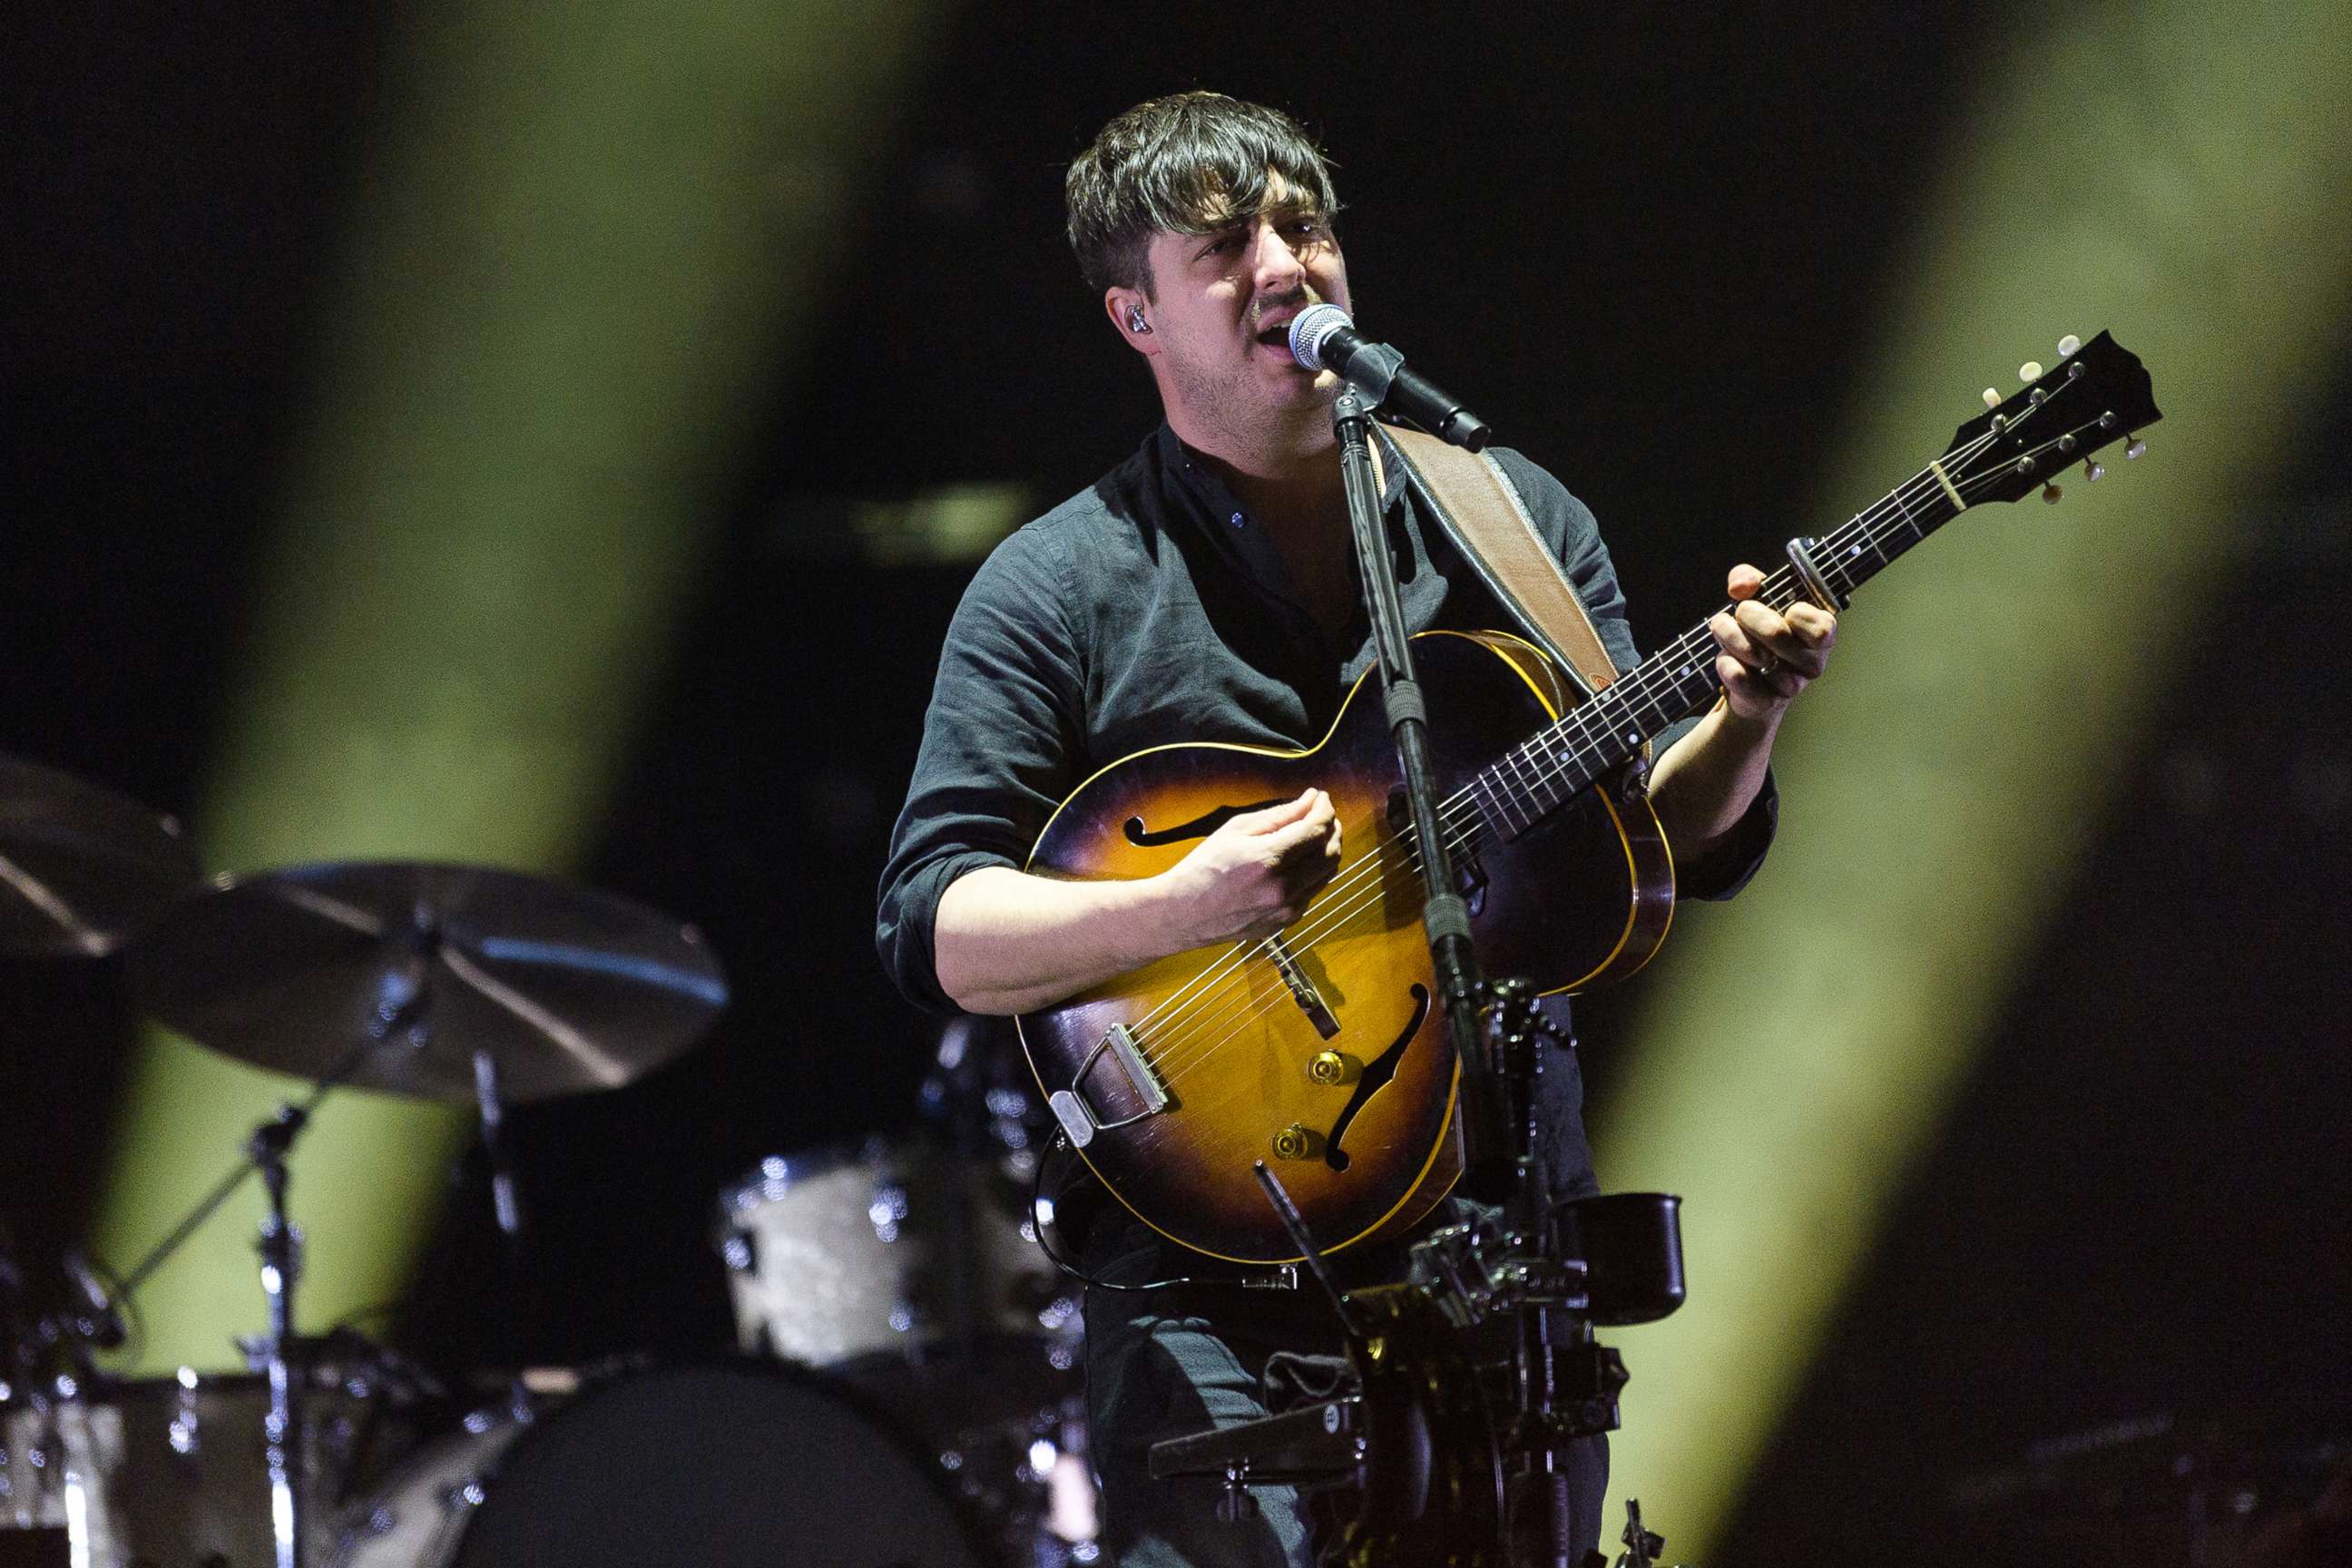 PHOTO: Marcus Mumford of Mumford & Sons performs onstage during day four at Okeechobee Music & Arts Festival at Sunshine Grove, March 8, 2020, in Okeechobee, Fla.